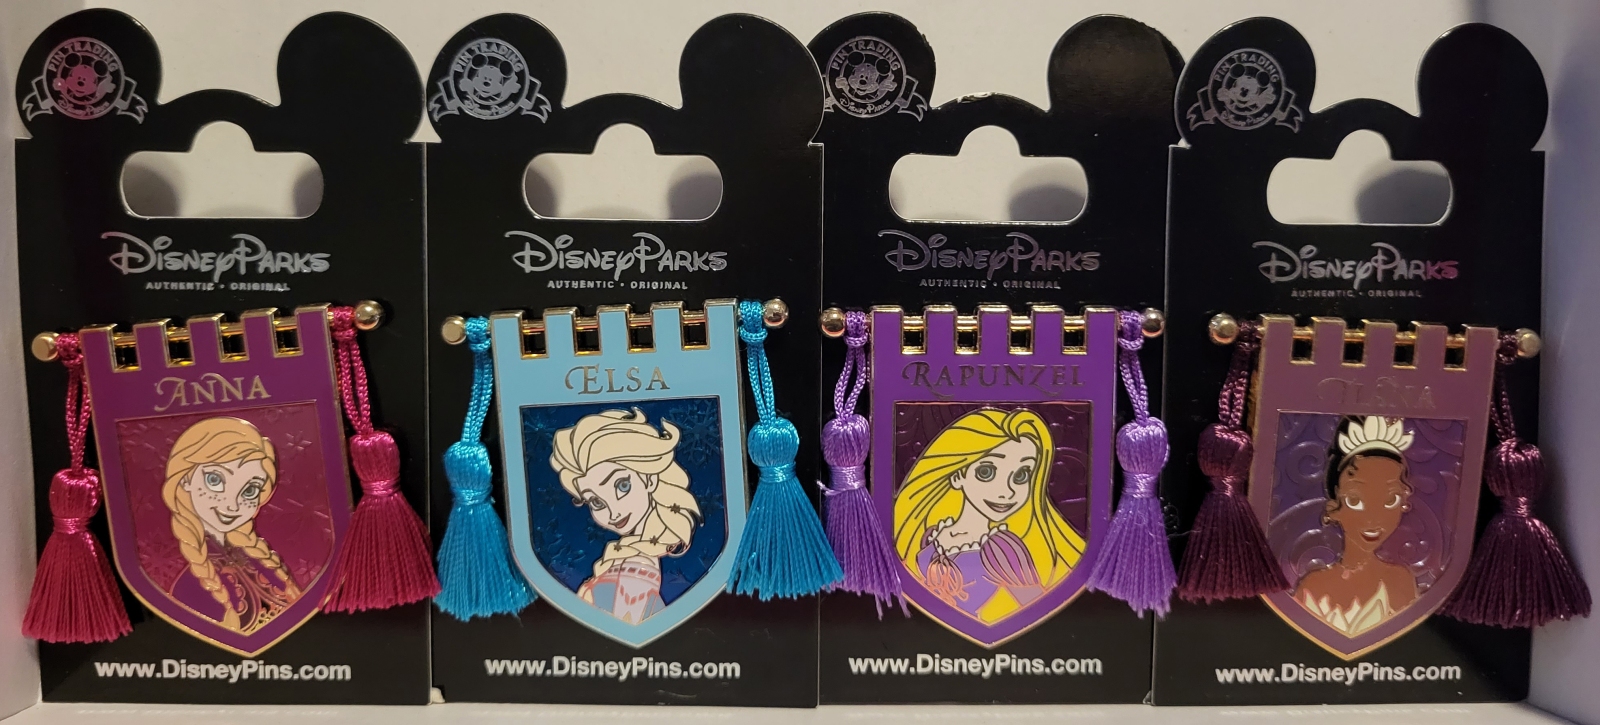 Frozen Anna and Elsa, Tangle Rapunzel, and Tiana Tapestry Disney Pins